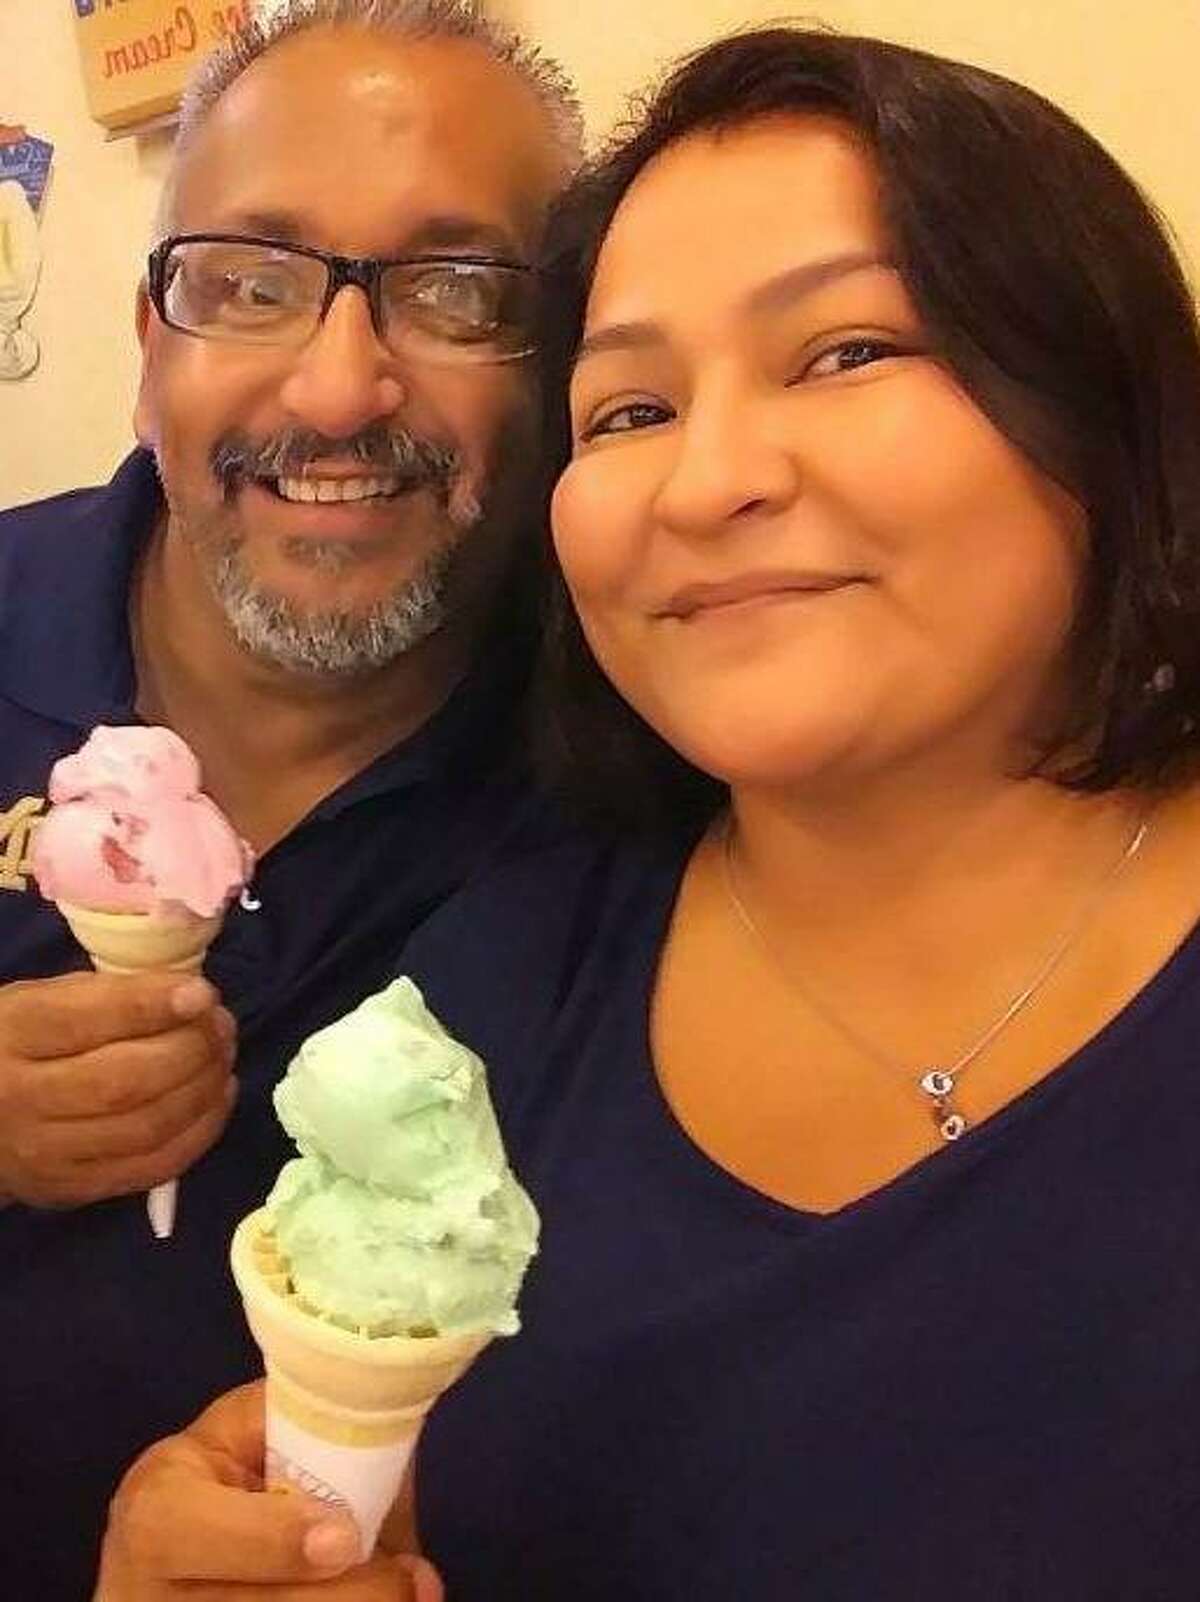 John Pena Montez, seen with his common-law wife Melissa Sanchez, was killed in a police shooting on March 26, 2021. He was 57.